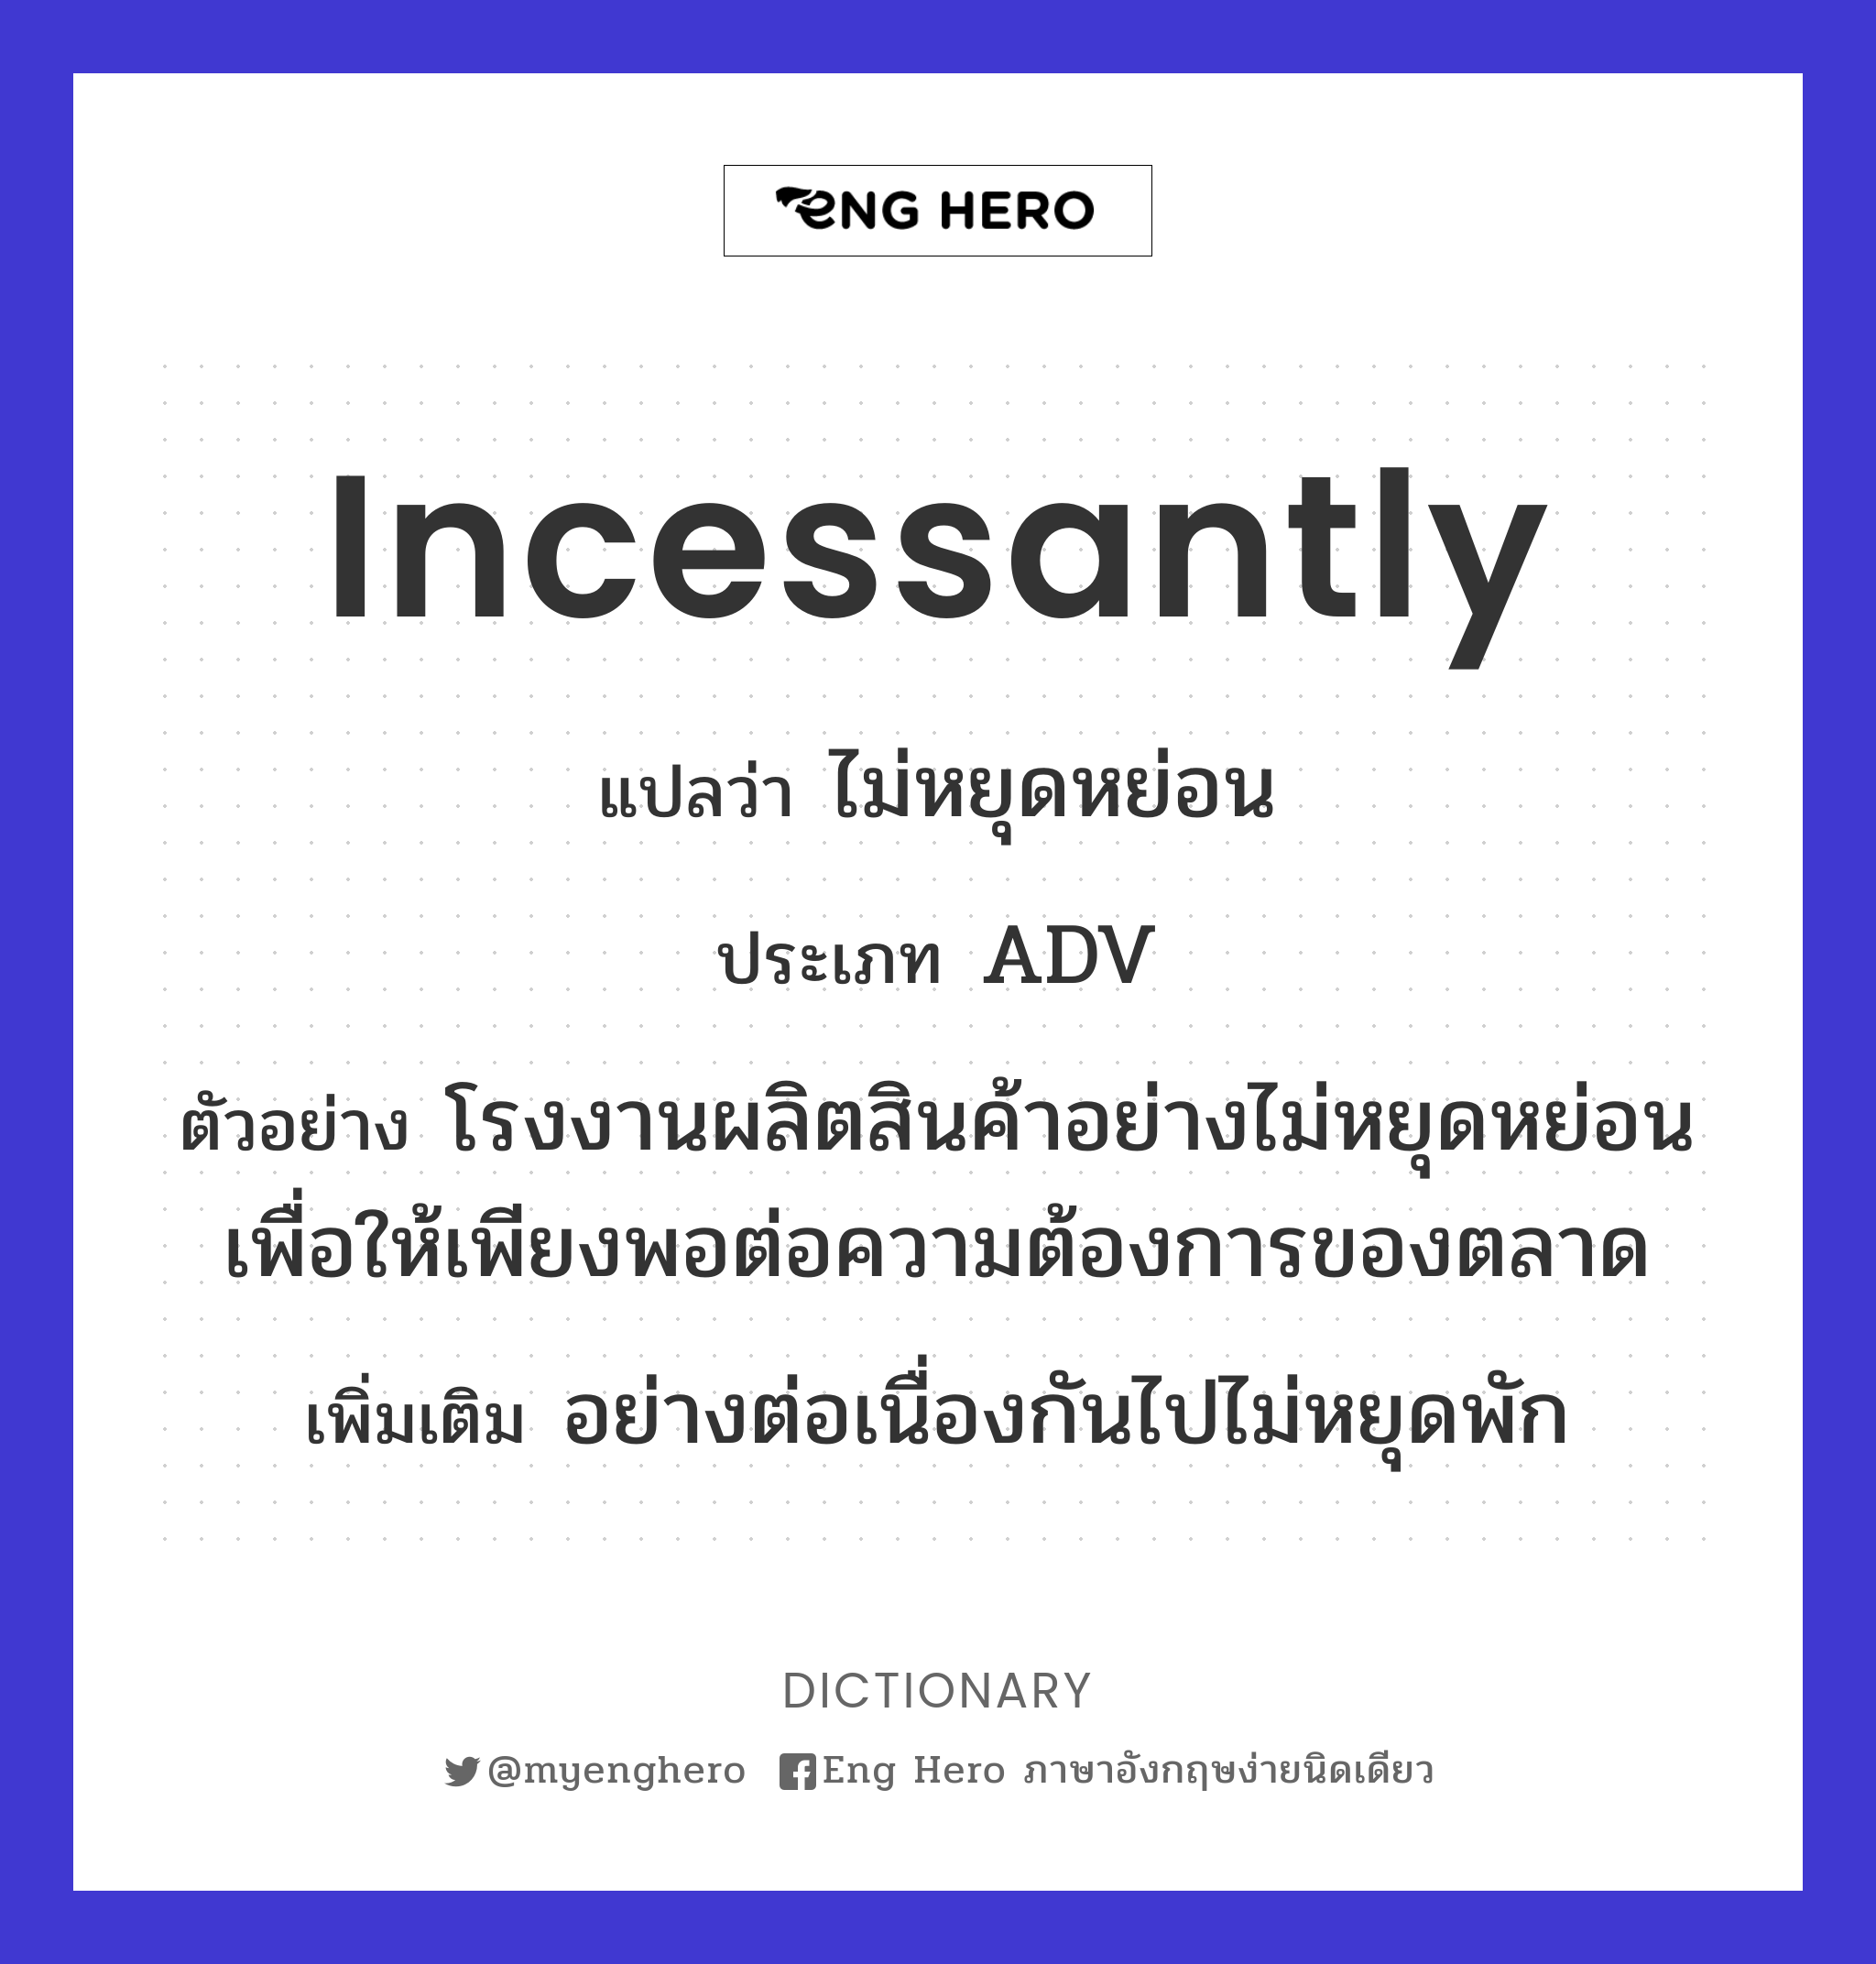 incessantly